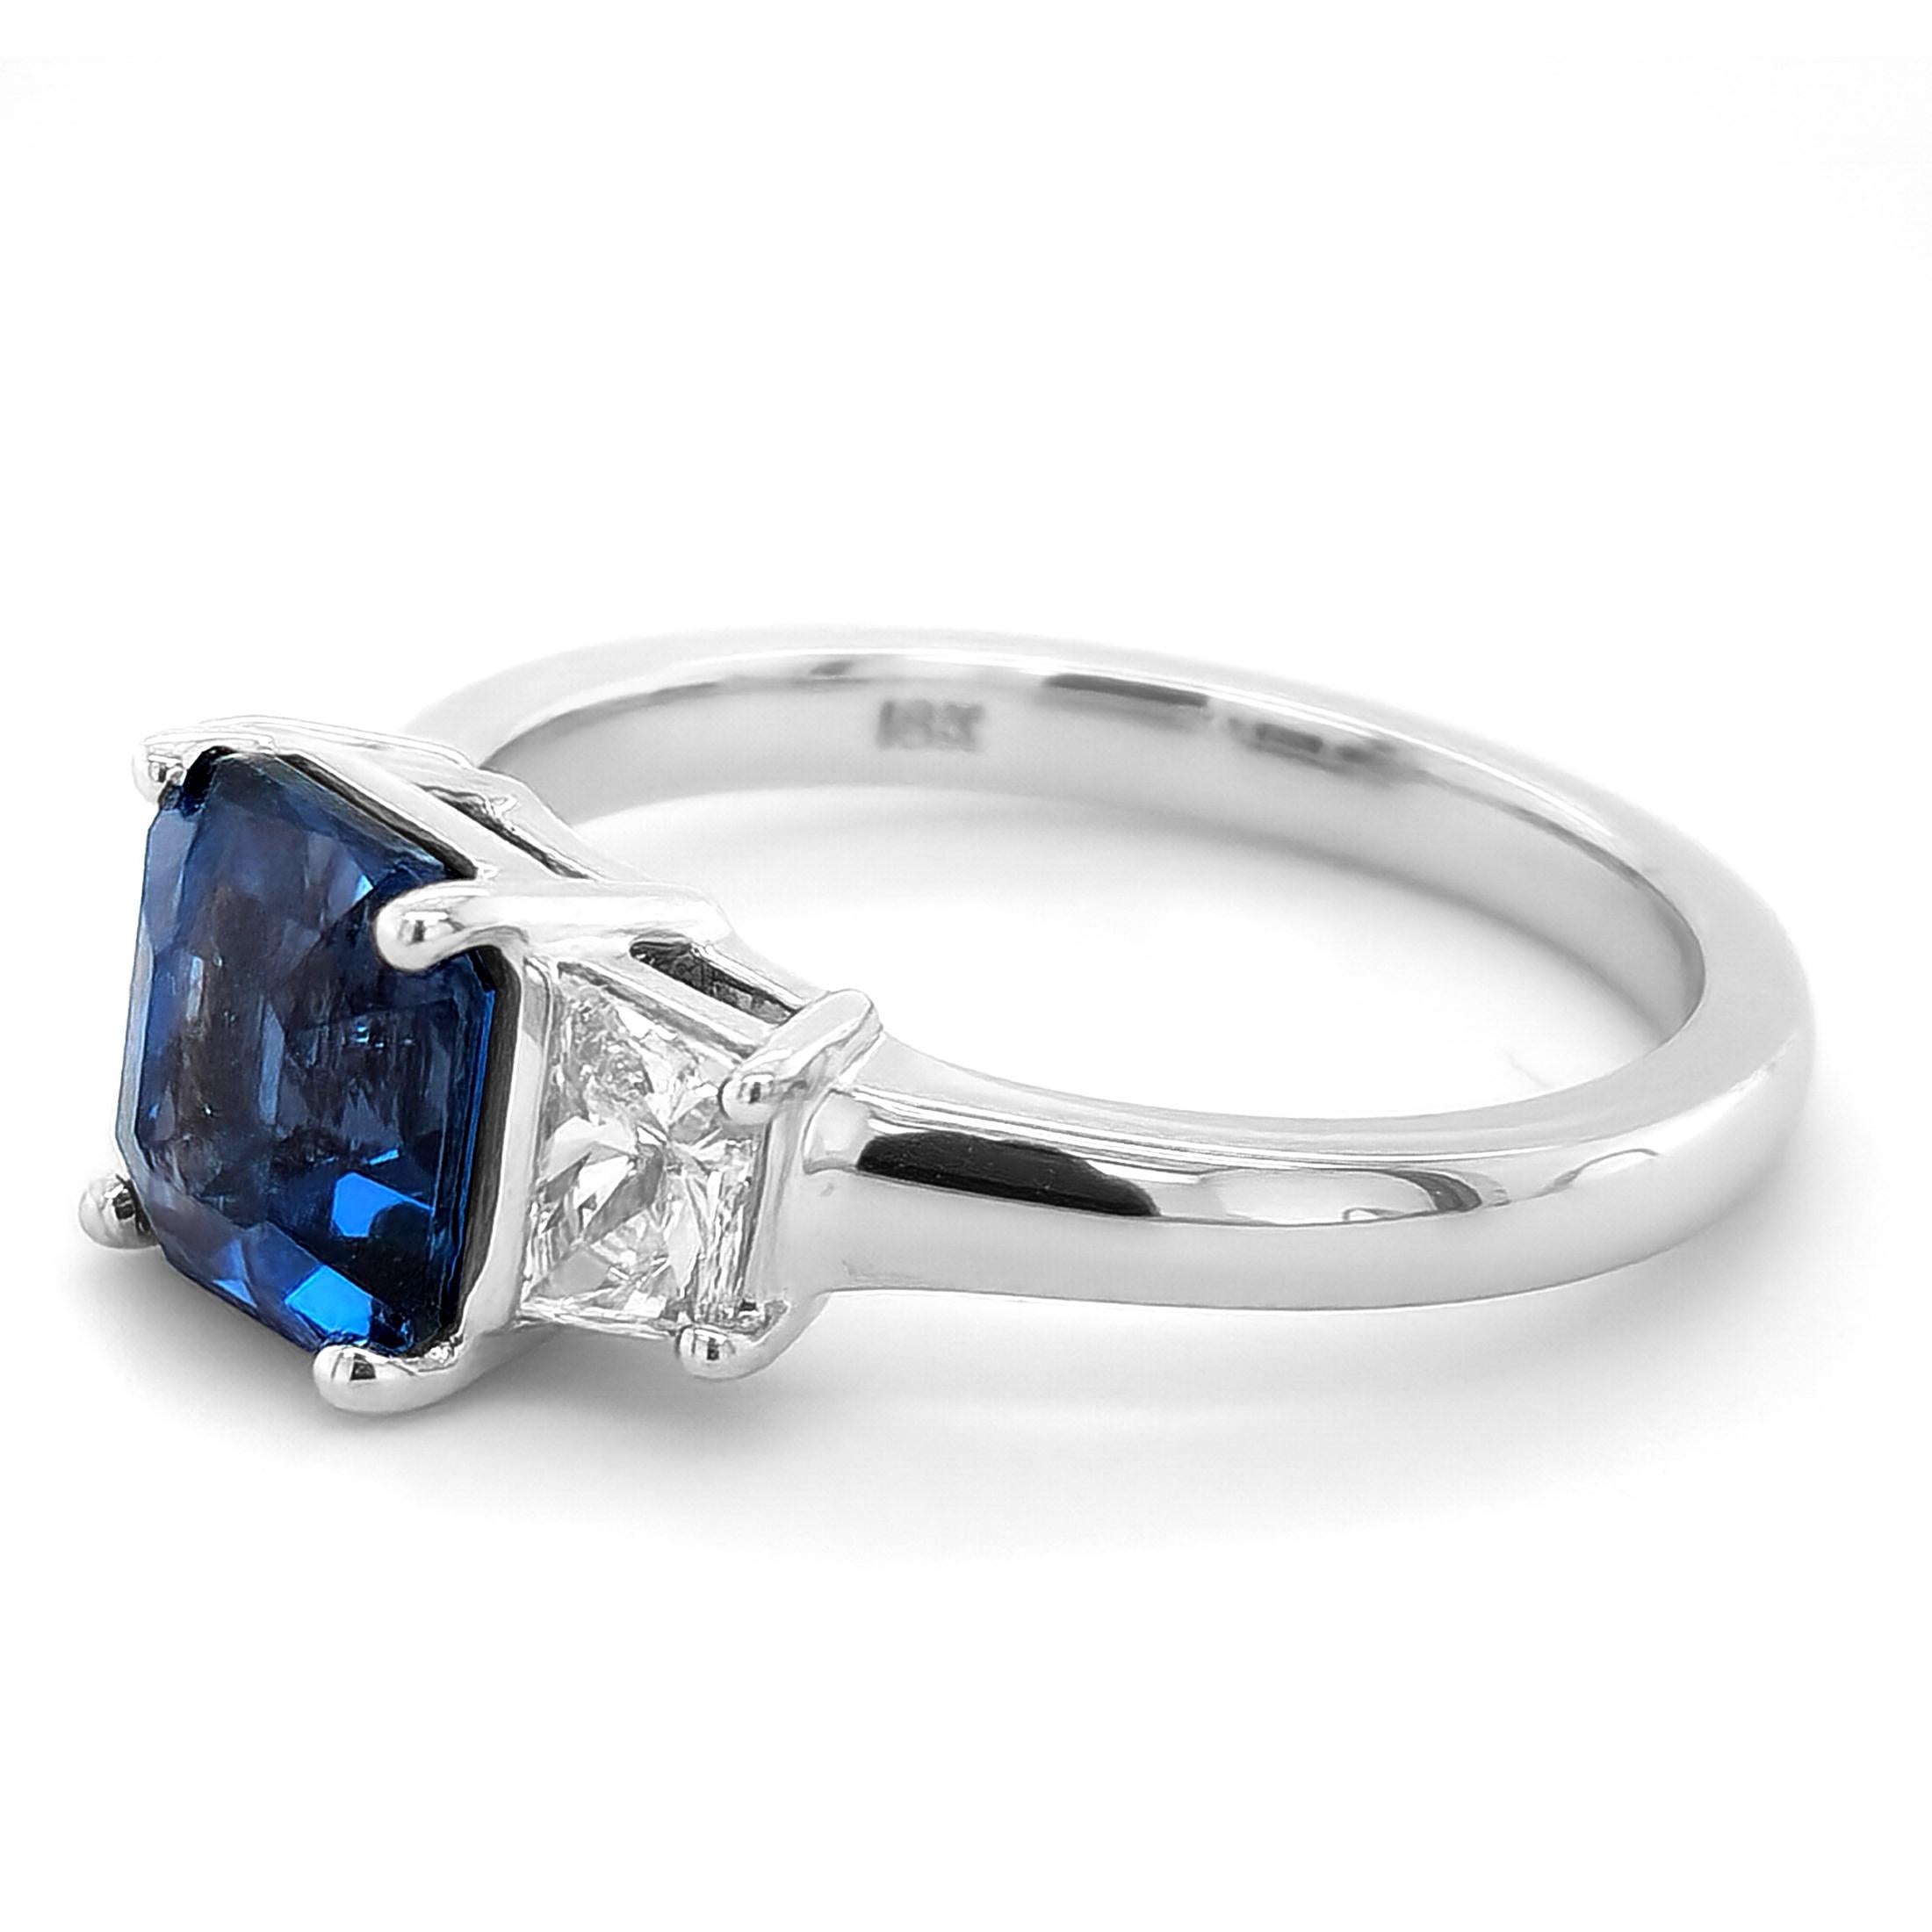 Mixed Cut GRS Certified 2.18 Carats Cobalt Spinel Diamonds set in 18K White Gold Ring For Sale